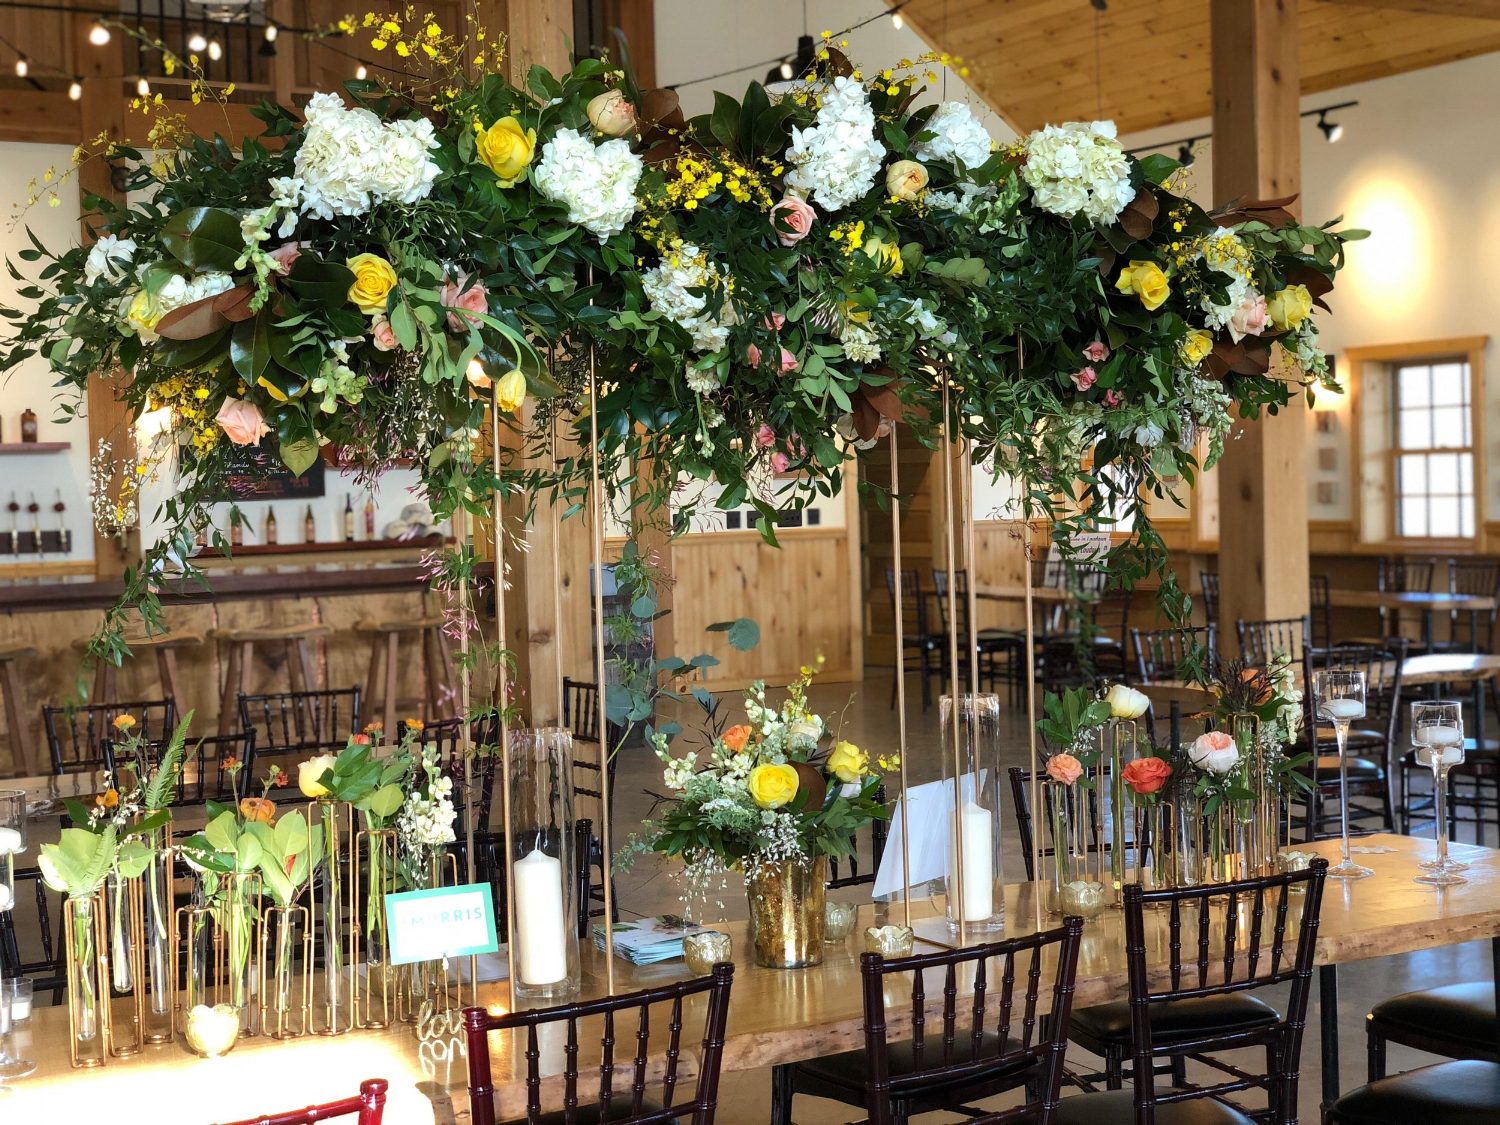 A head table installation that rises above the wedding party.